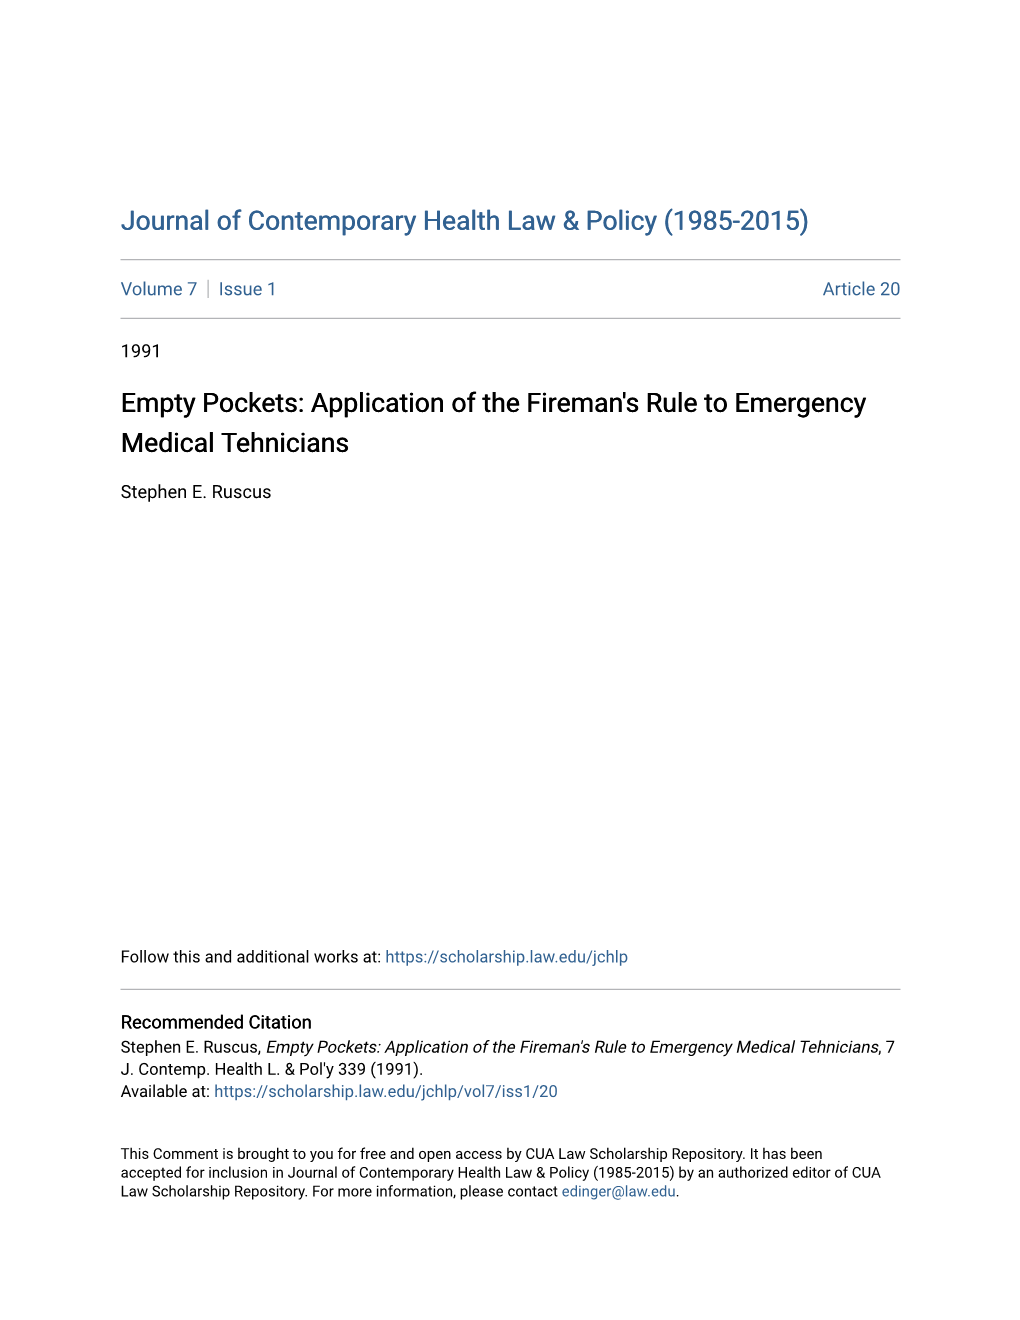 Application of the Fireman's Rule to Emergency Medical Tehnicians